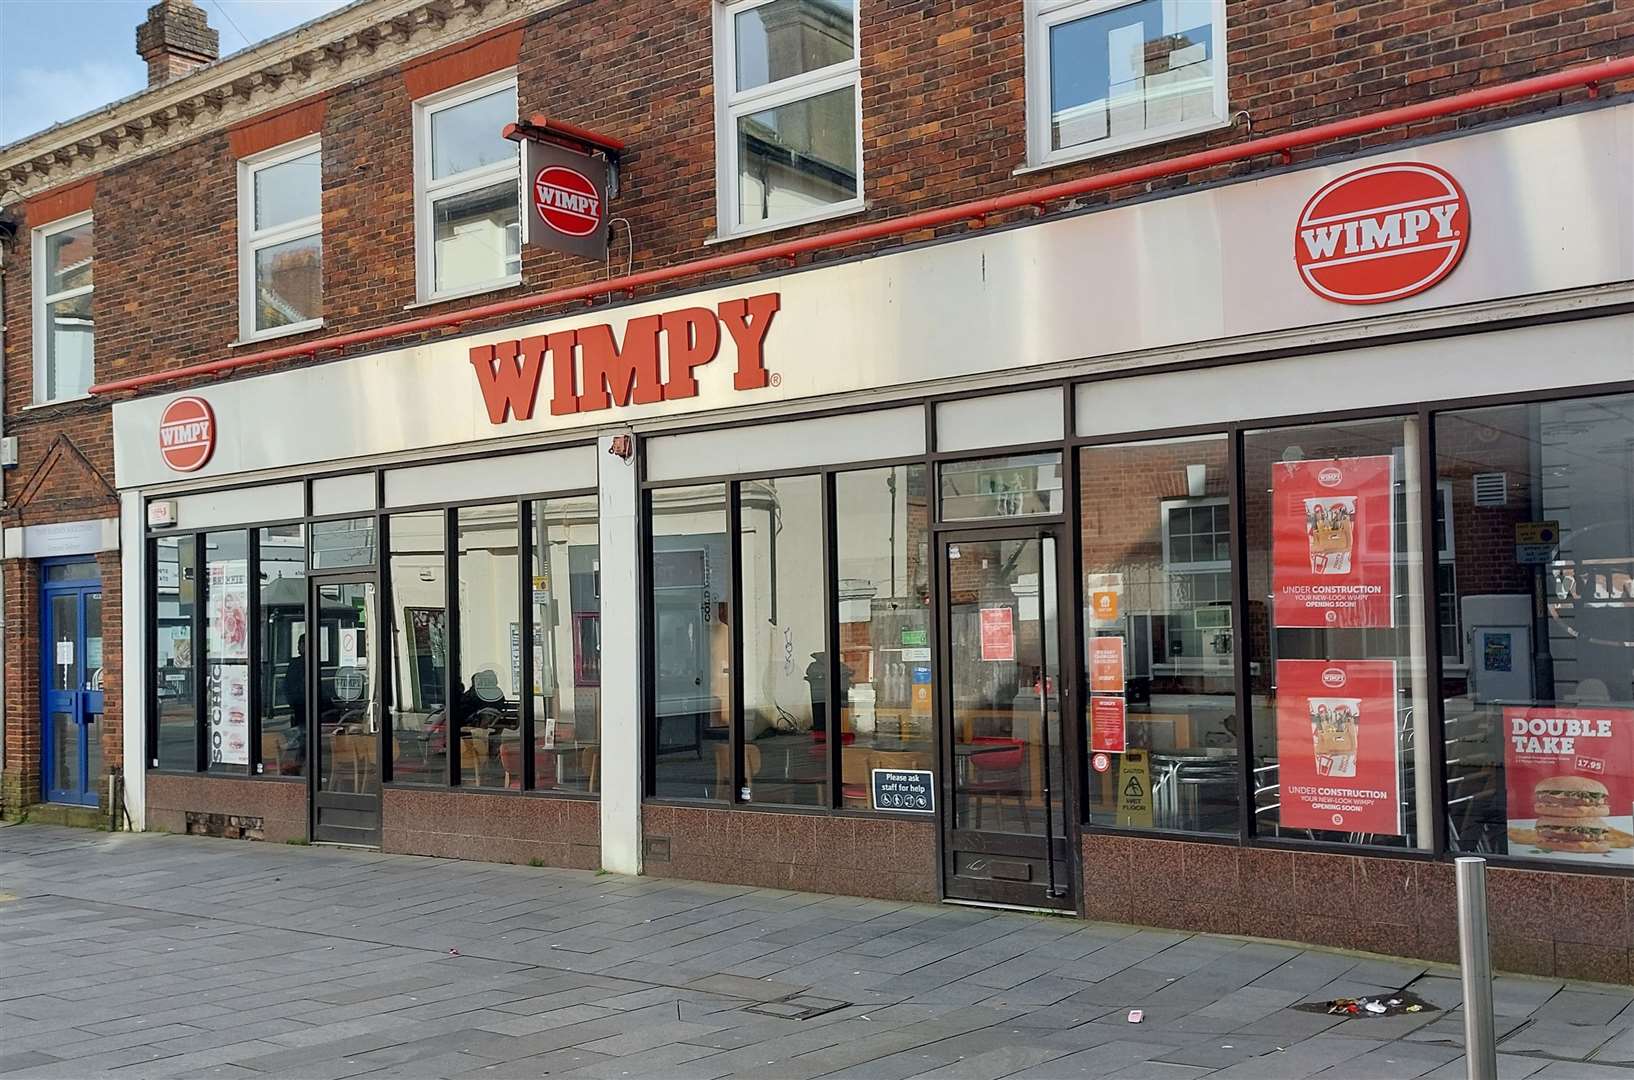 Wimpy was once king of the high street burgers…then McDonald’s turned up